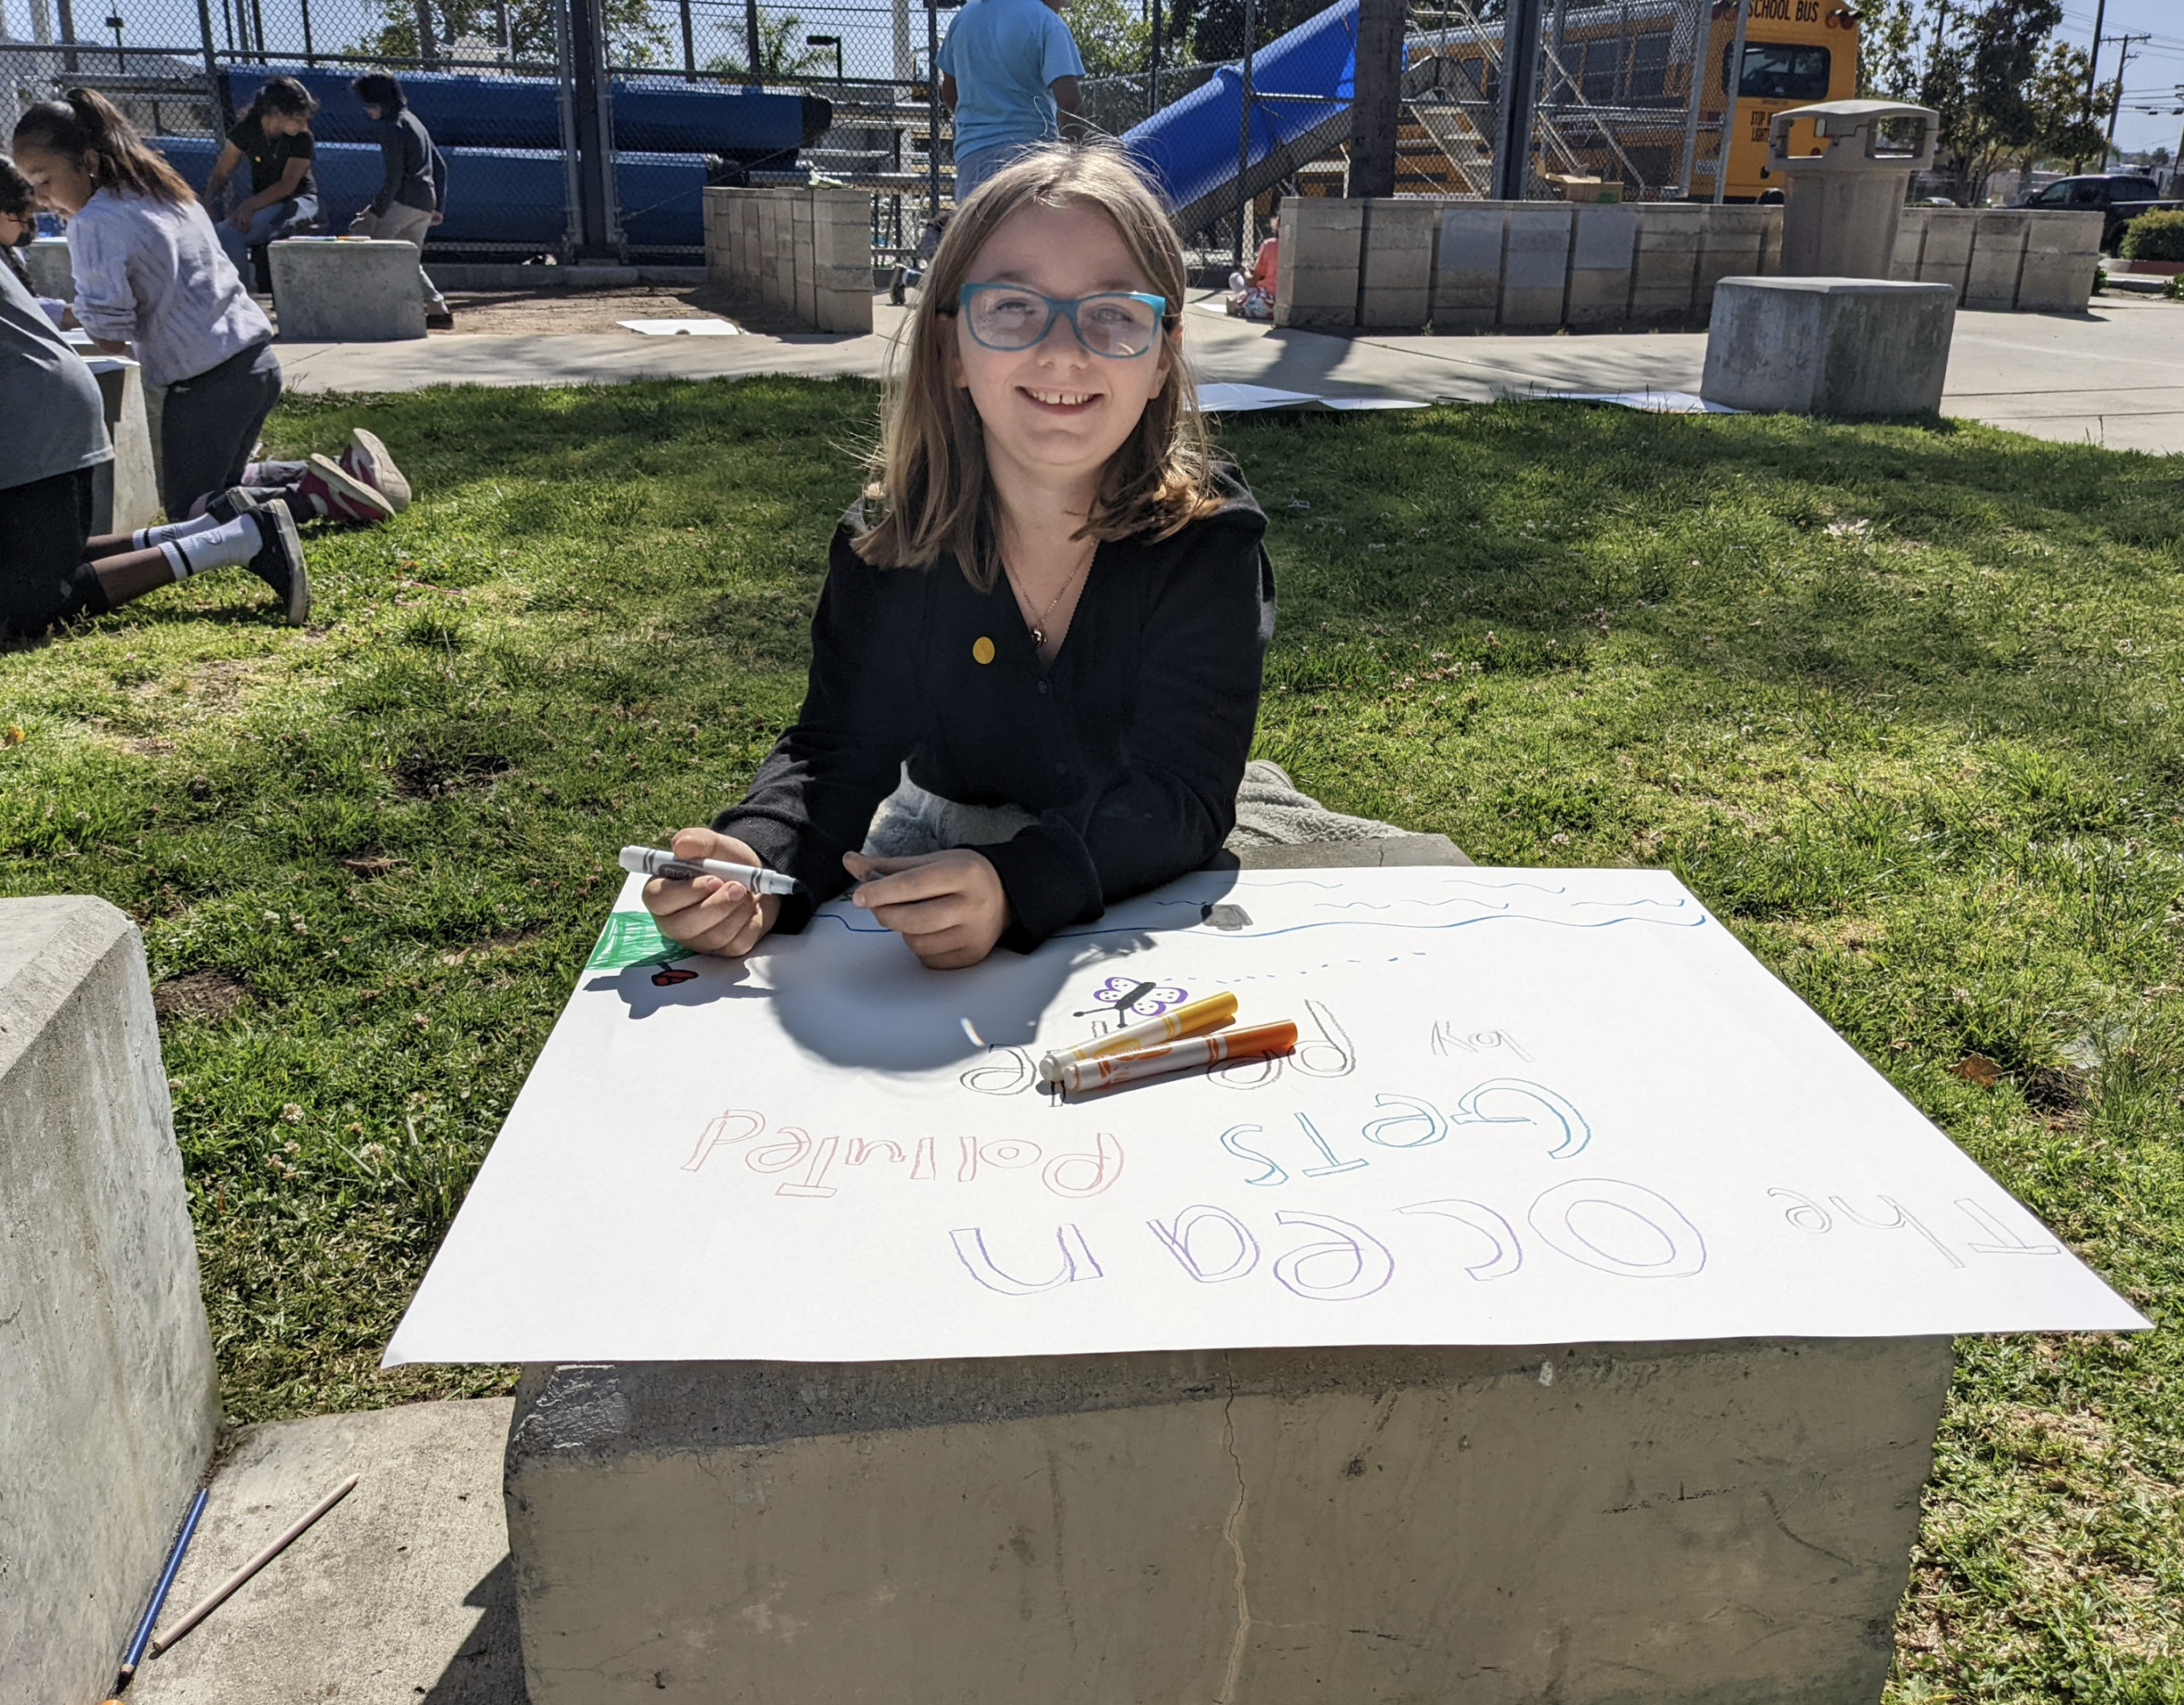 An elementary student draws a sign for Earth Day with marker on a big white board in the park.